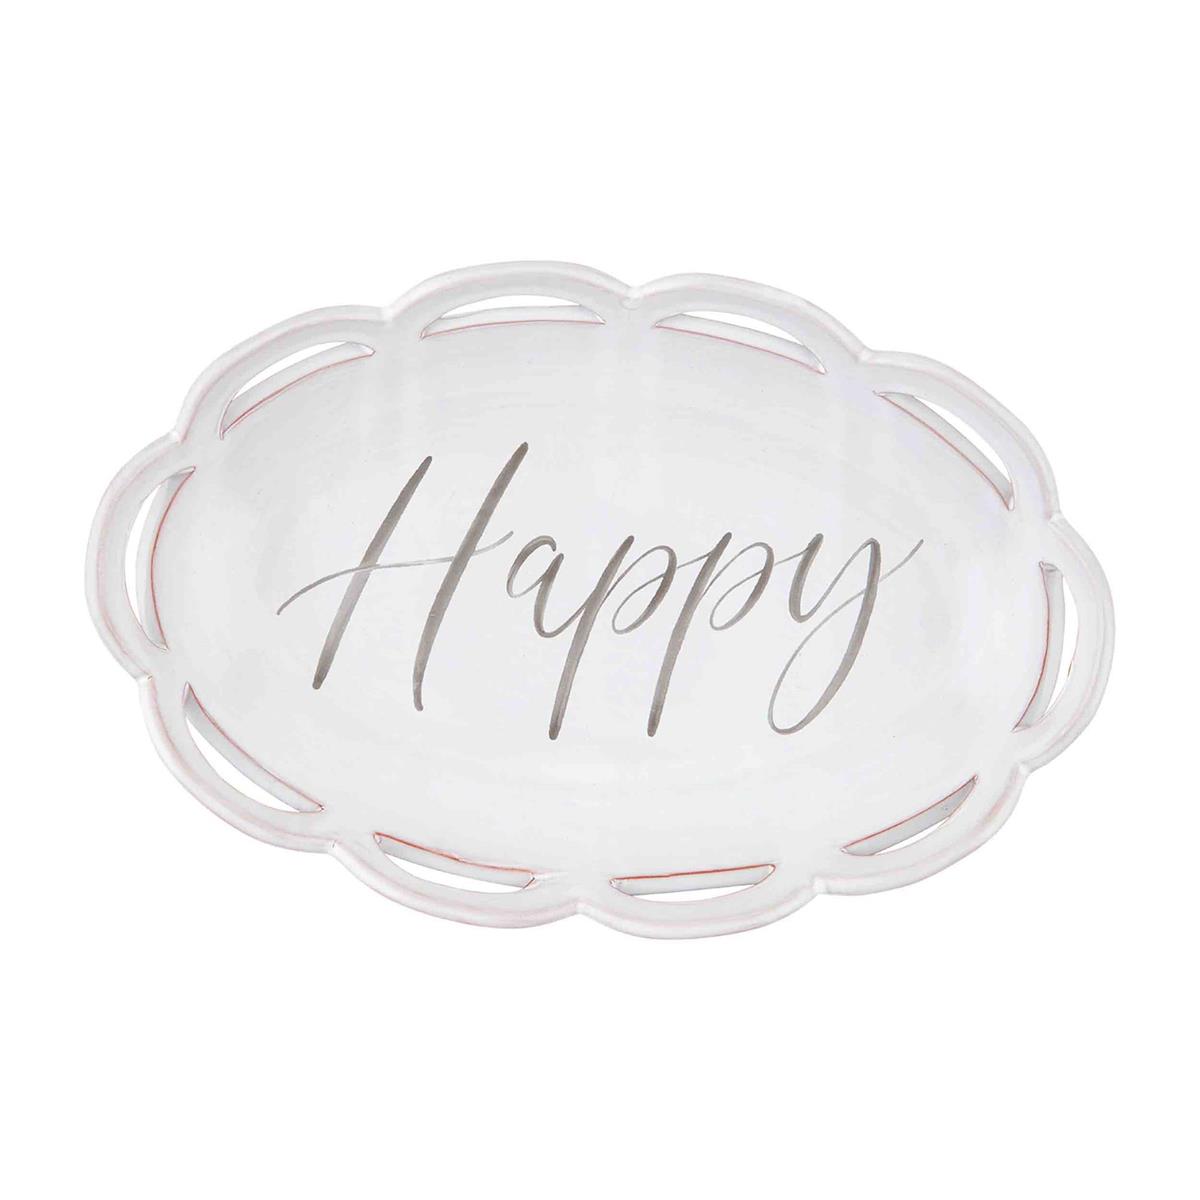 scalloped happy bowl displayed on a white background